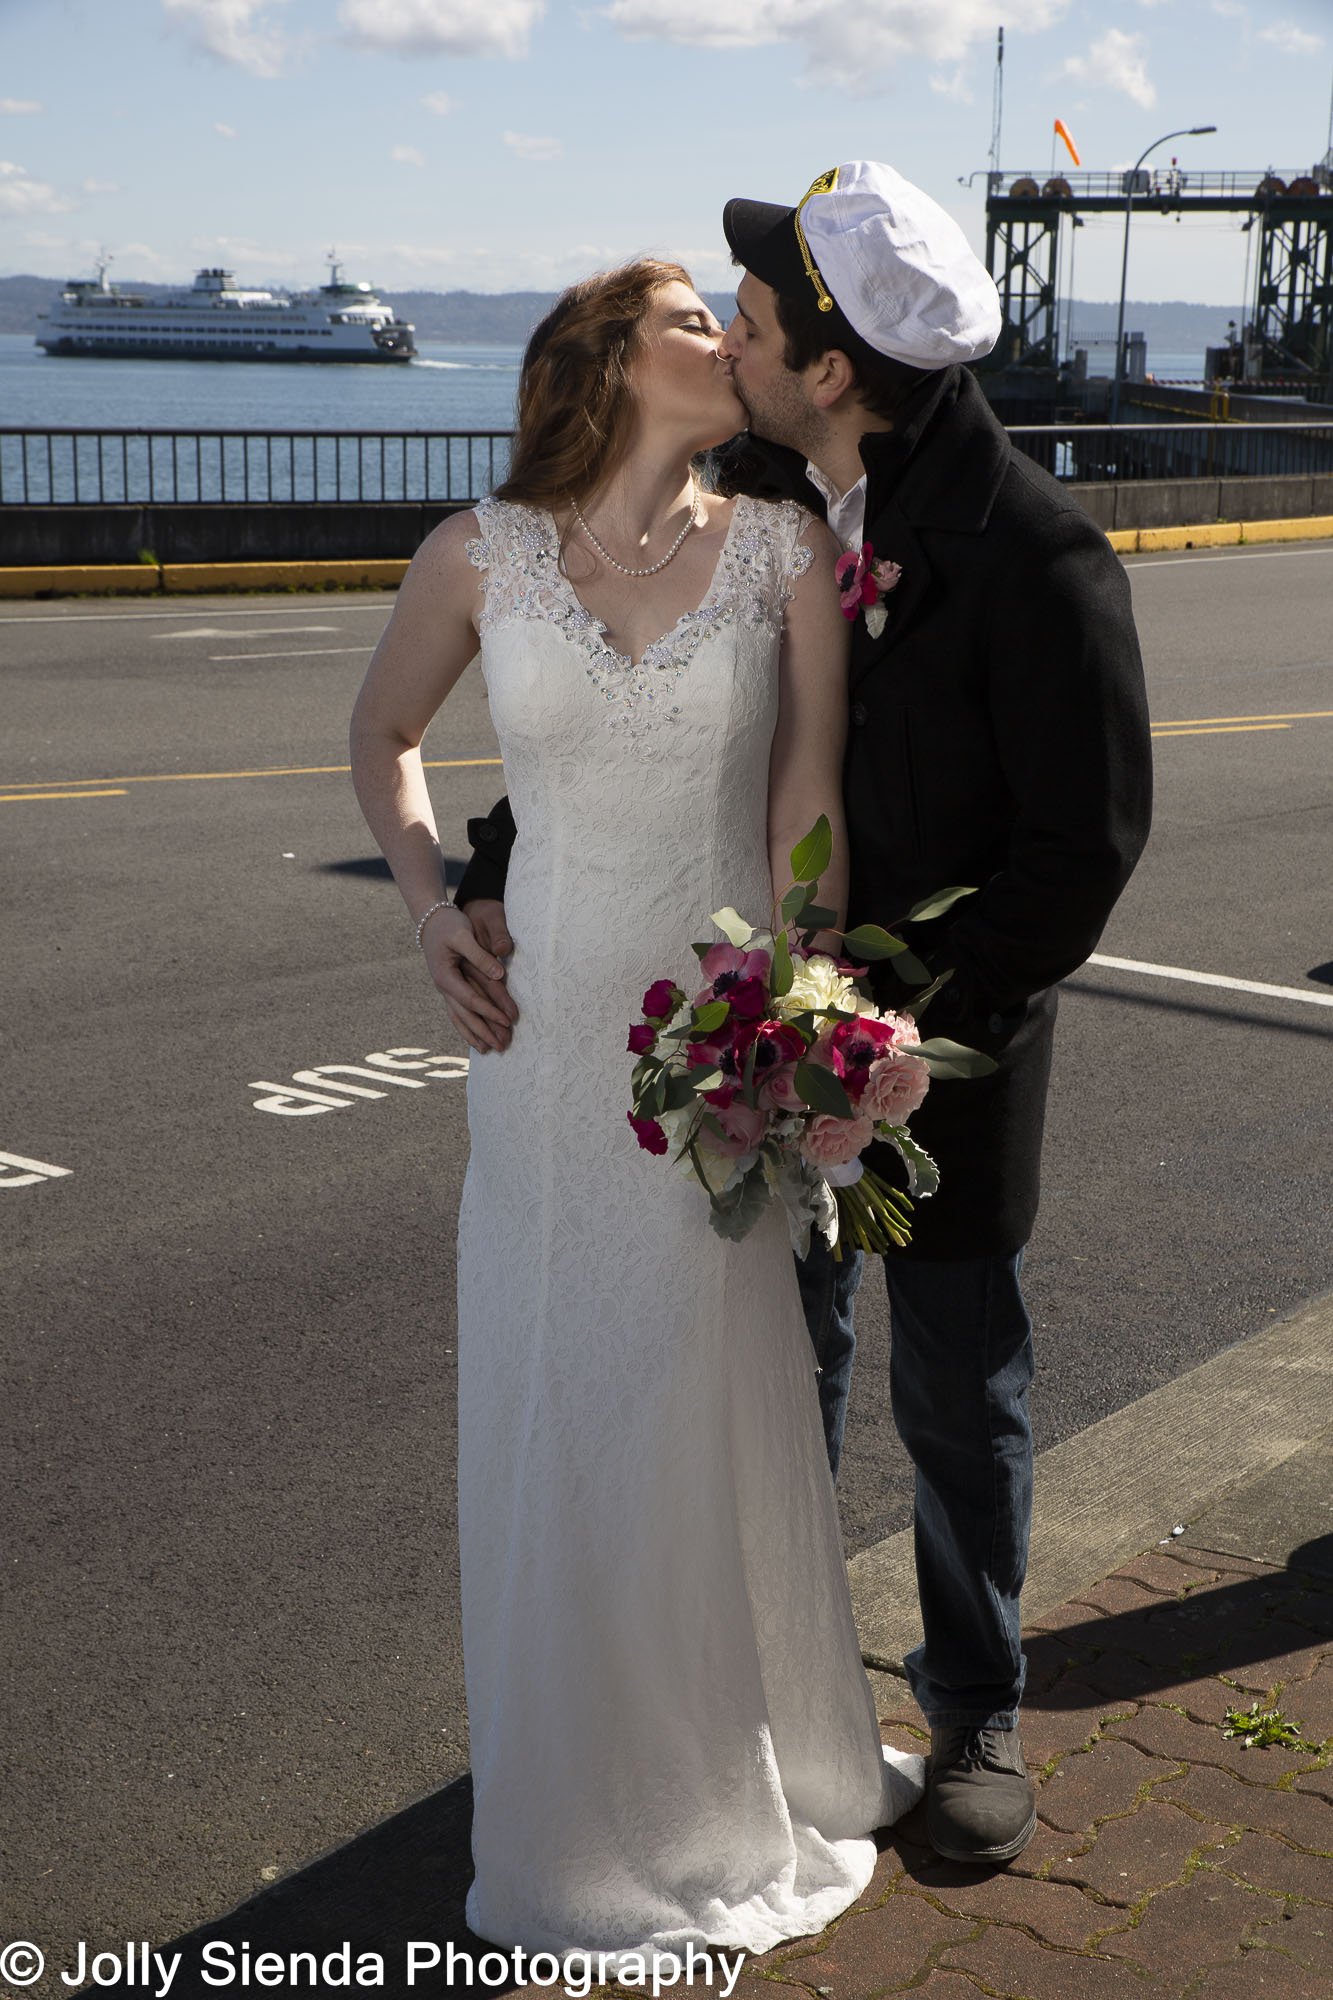 Weddings and a ferry